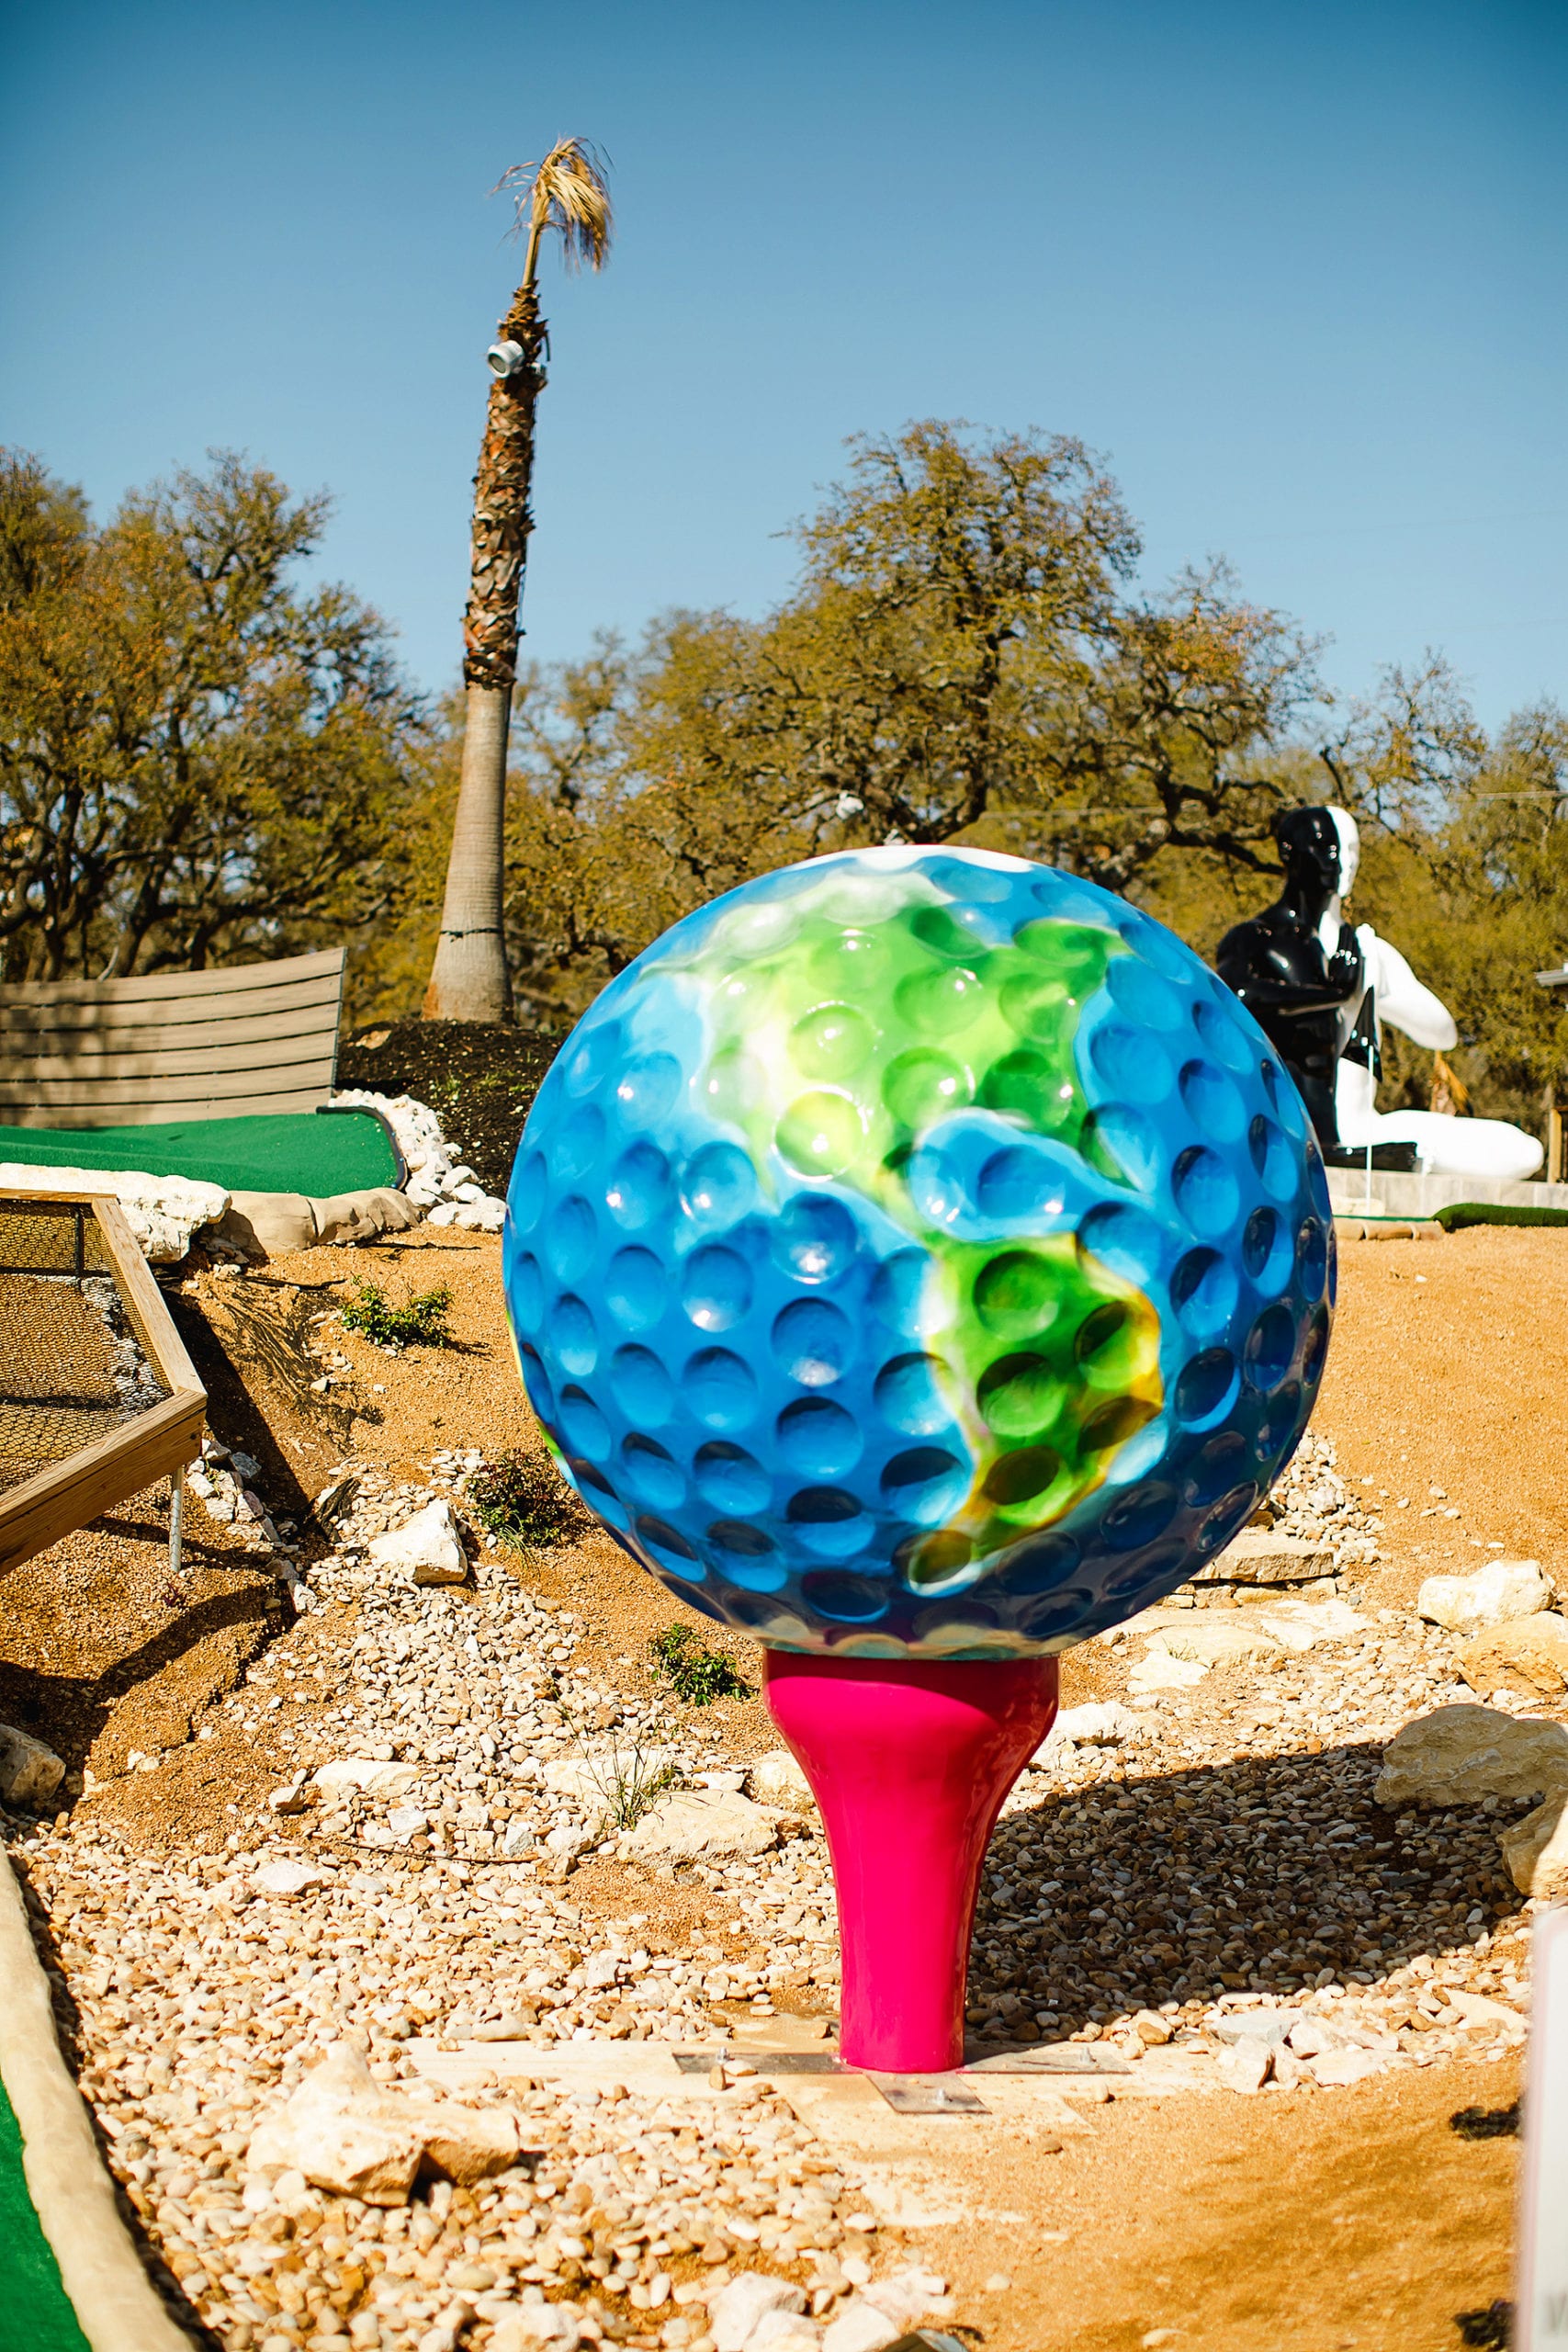 Sculpture at Dreamland outdoor mini golf in Dripping Springs